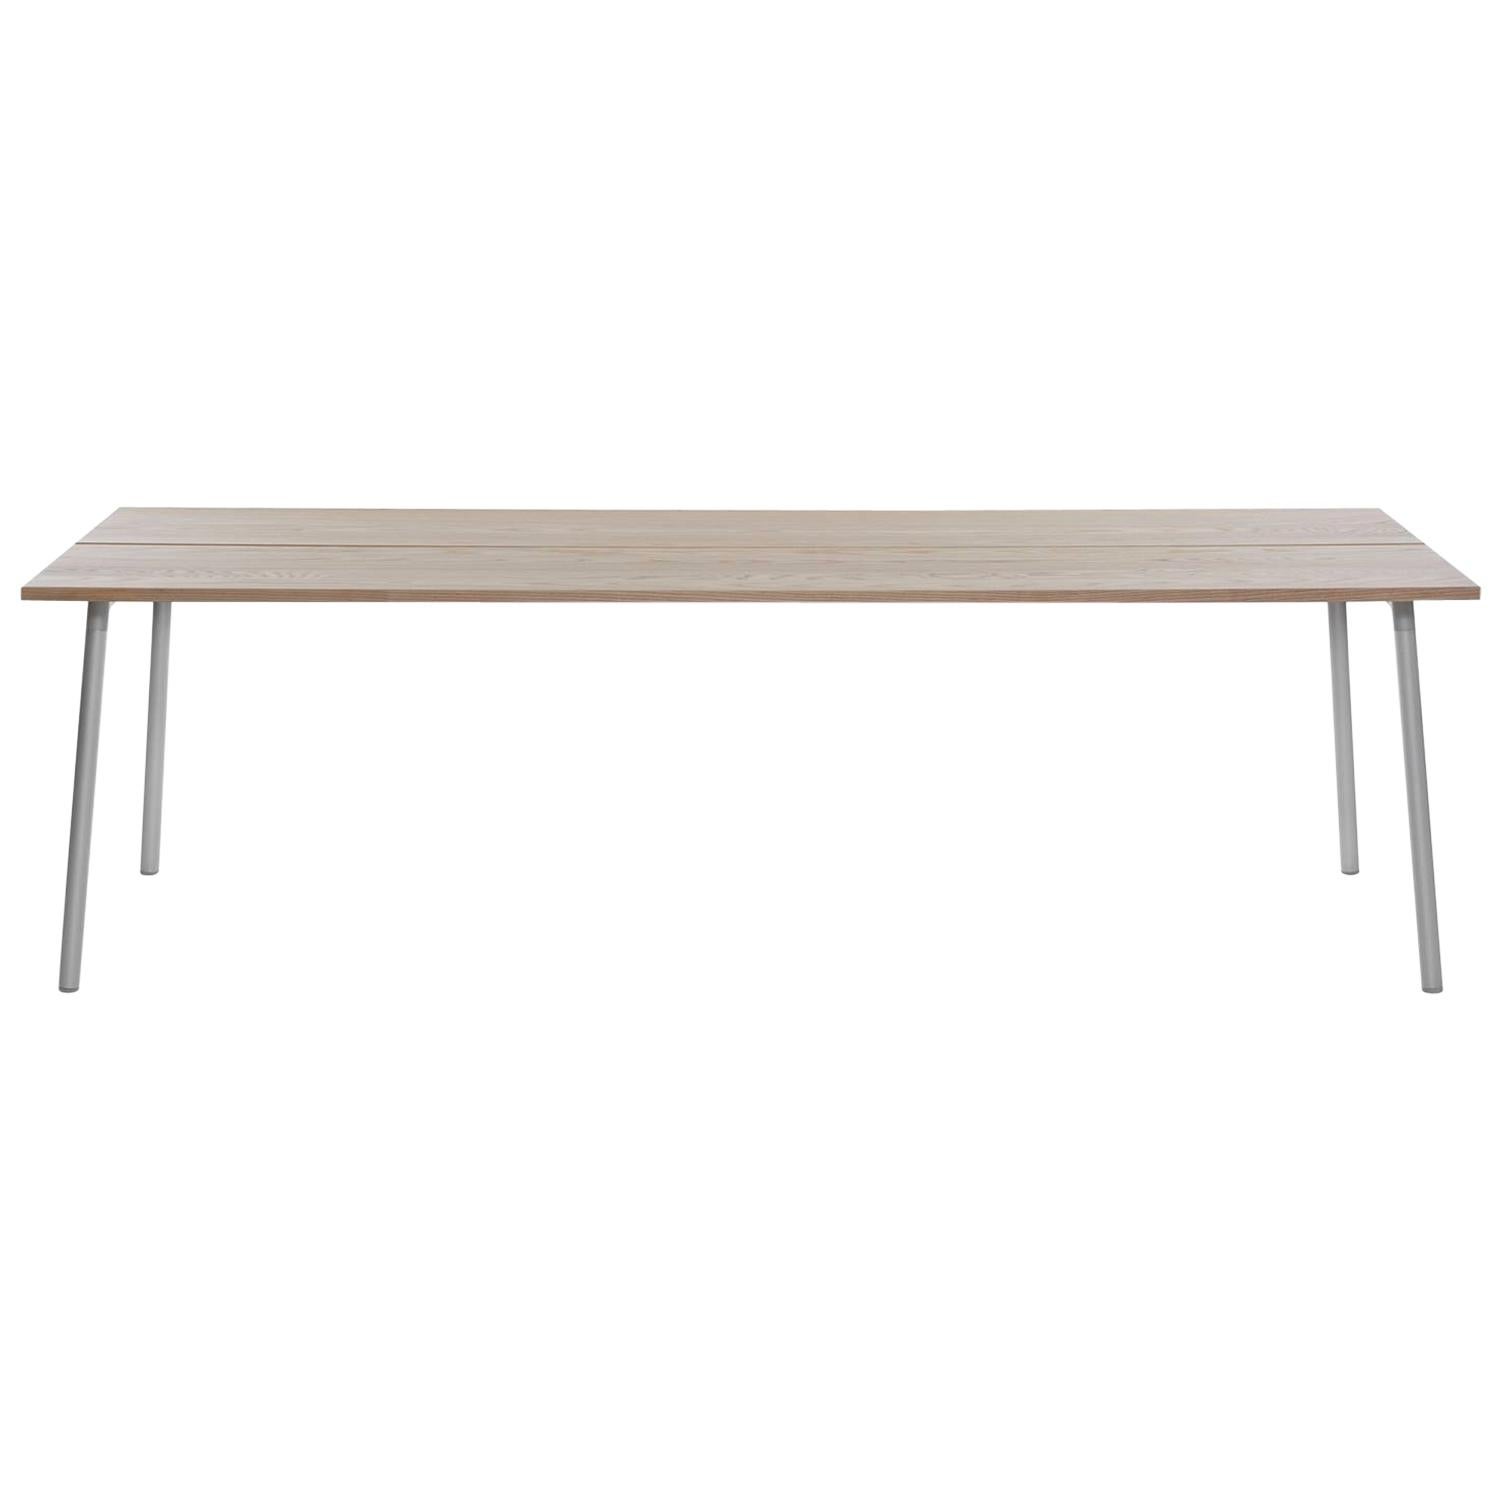 Emeco Run Extra Large Table in Aluminum and Ash by Sam Hecht + Kim Colin